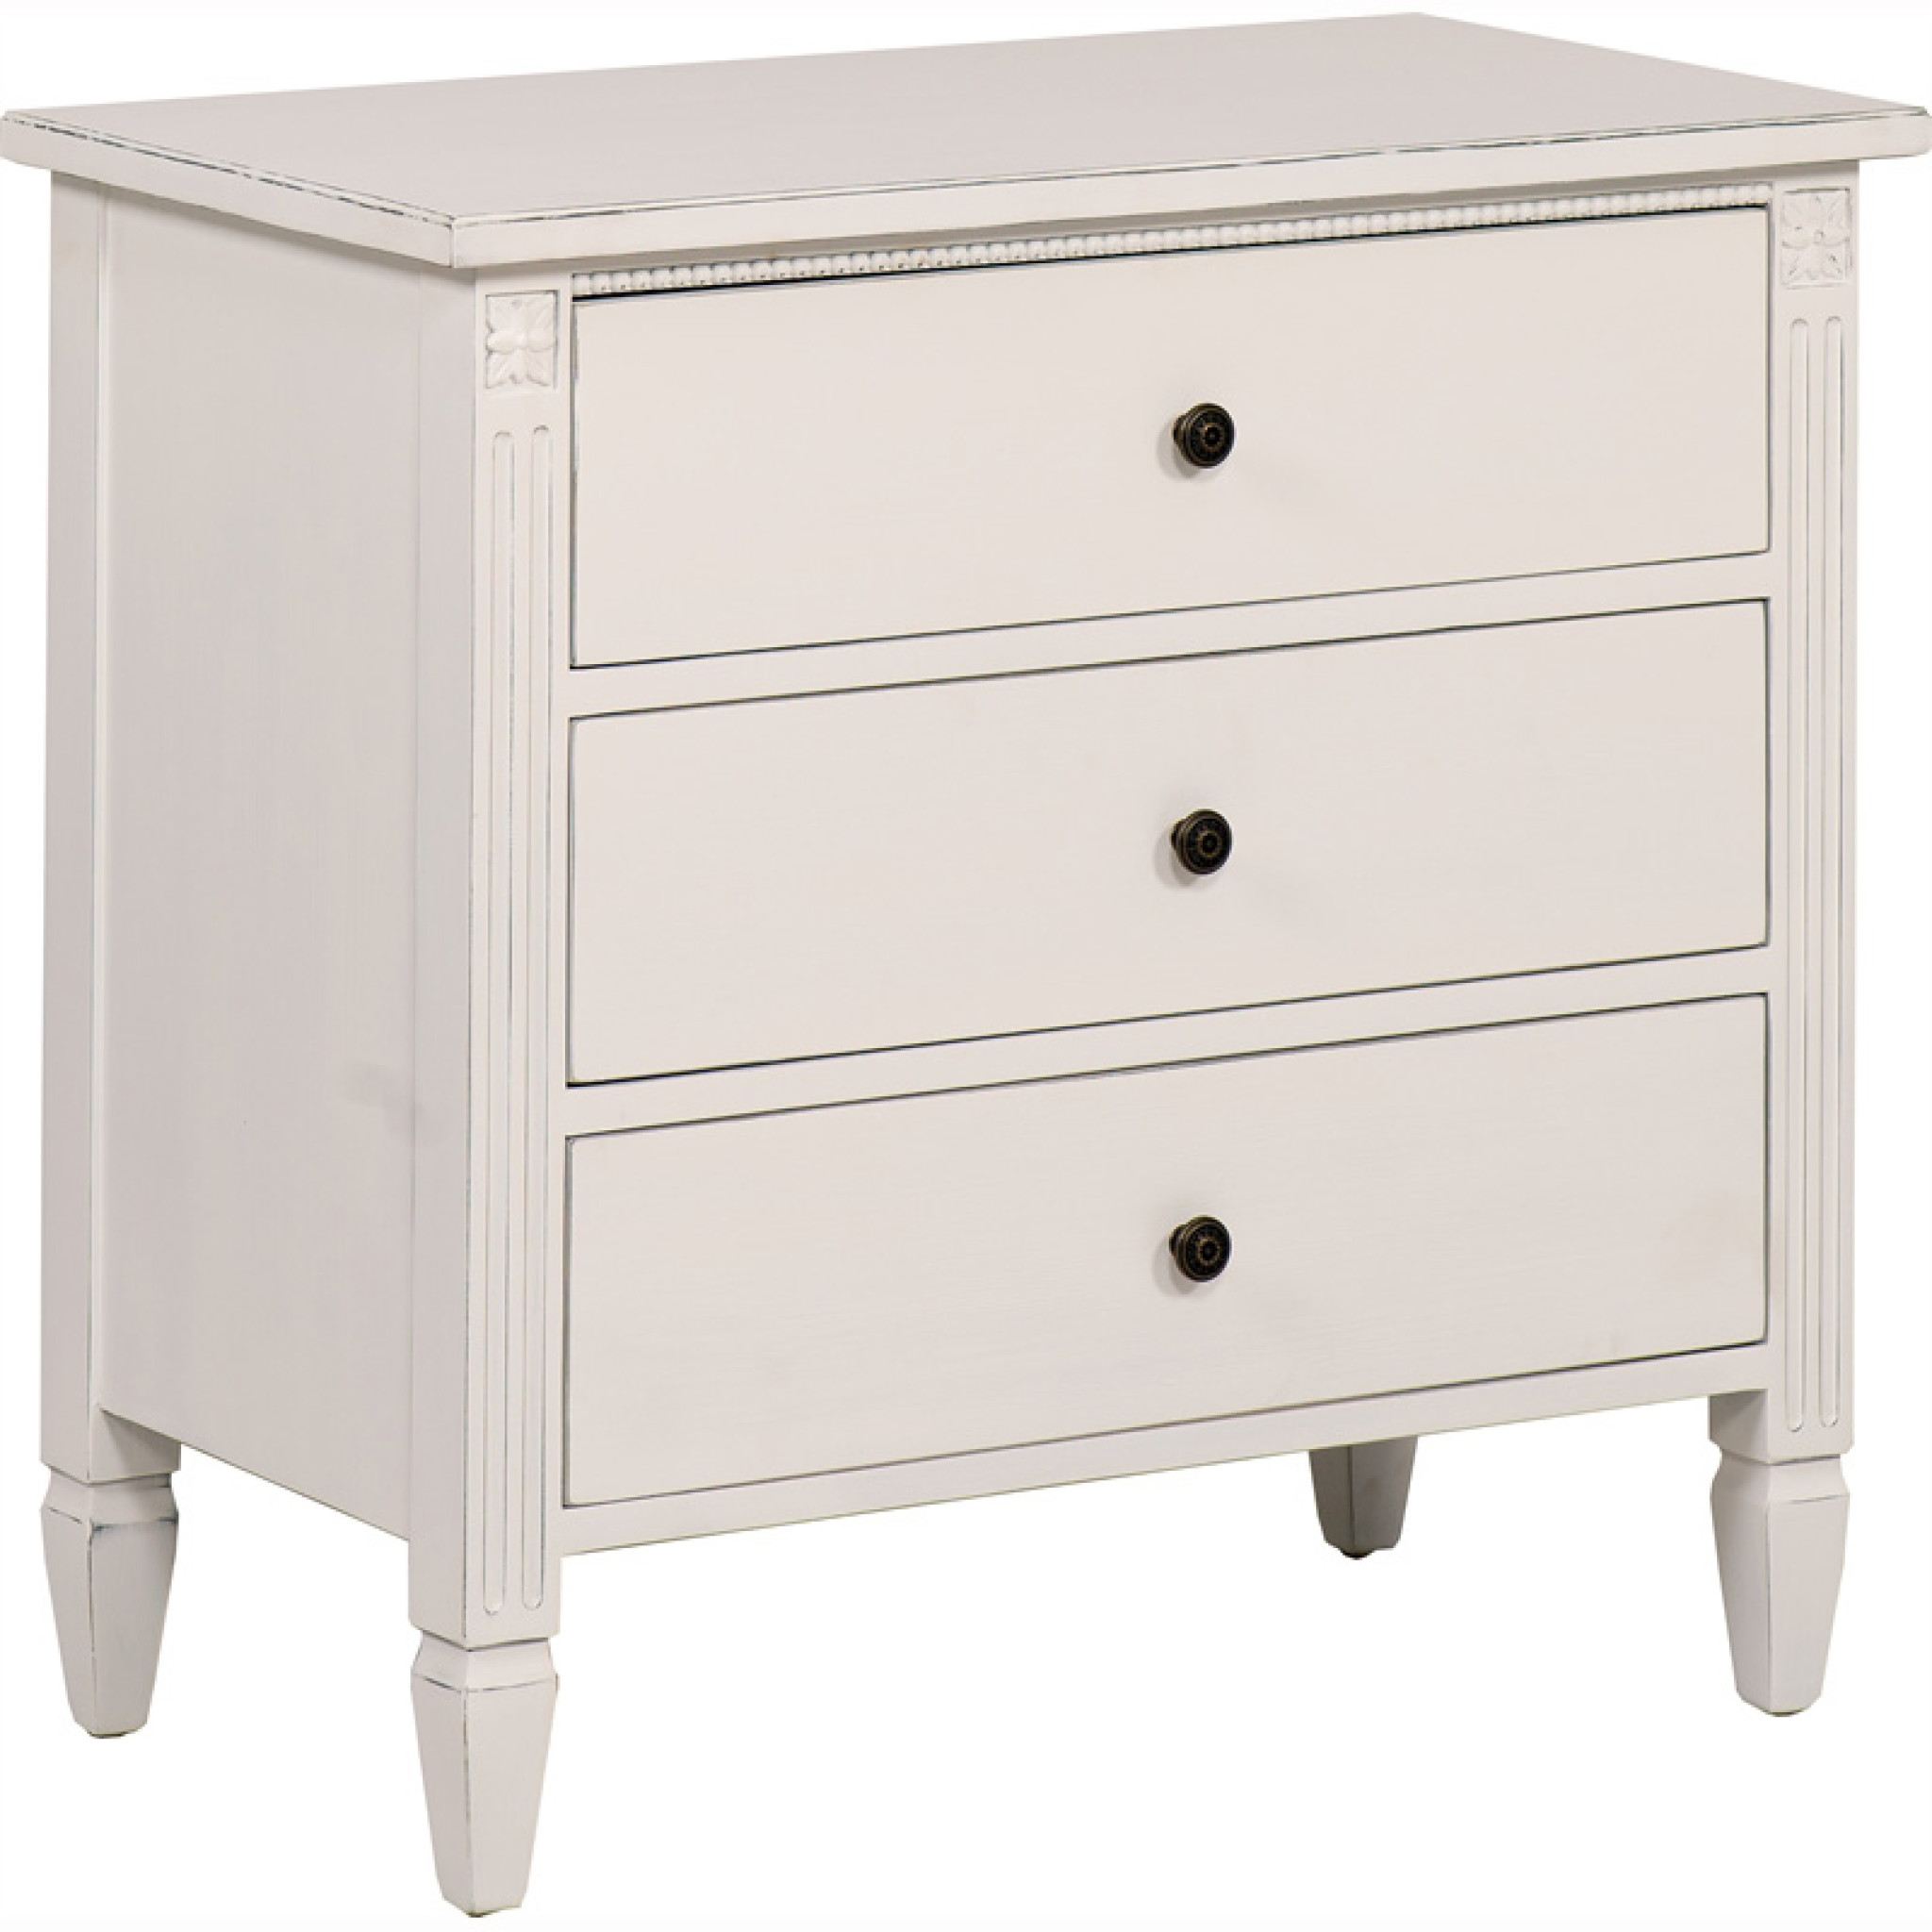 Larsson Low Chest Of Drawers Neptune Bedroom Furniture